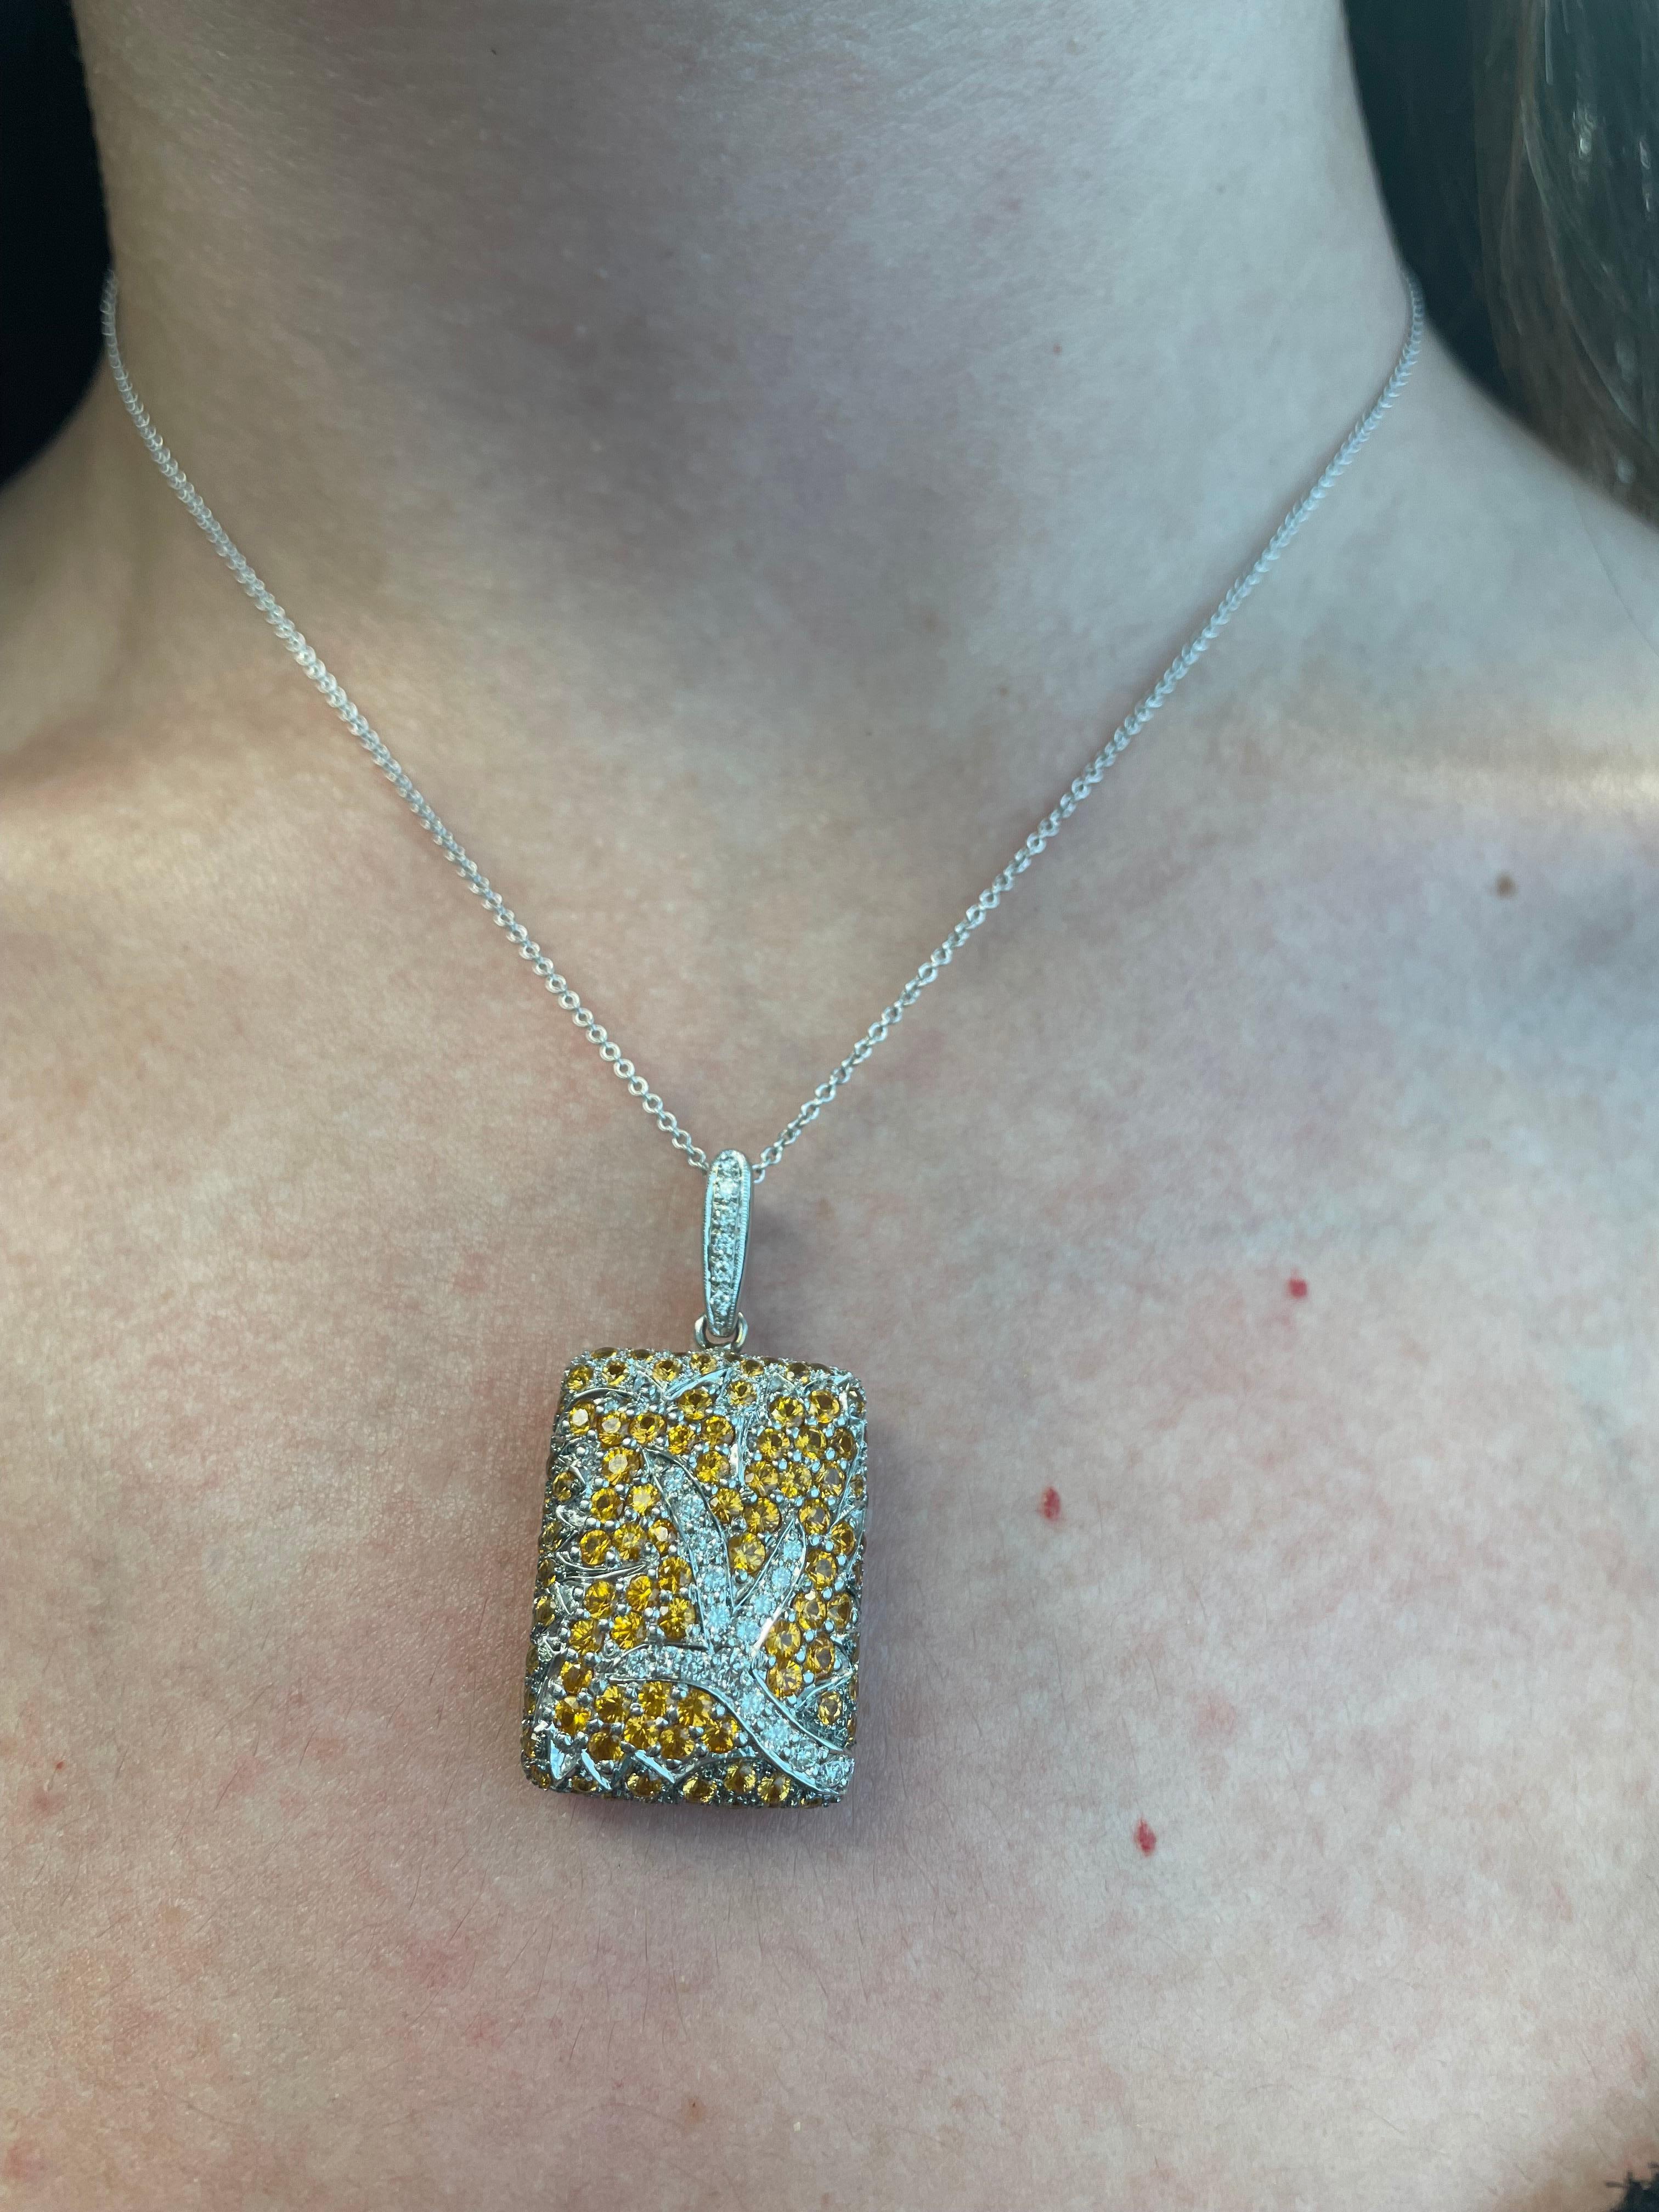 Beautiful tree motif yellow sapphire and diamond necklace pendant. 
4.80 carats of round yellow sapphire. 0.48ct of round brilliant diamonds, approximately G/H color and SI clarity. 18-karat white gold.
Accommodated with an up-to-date digital